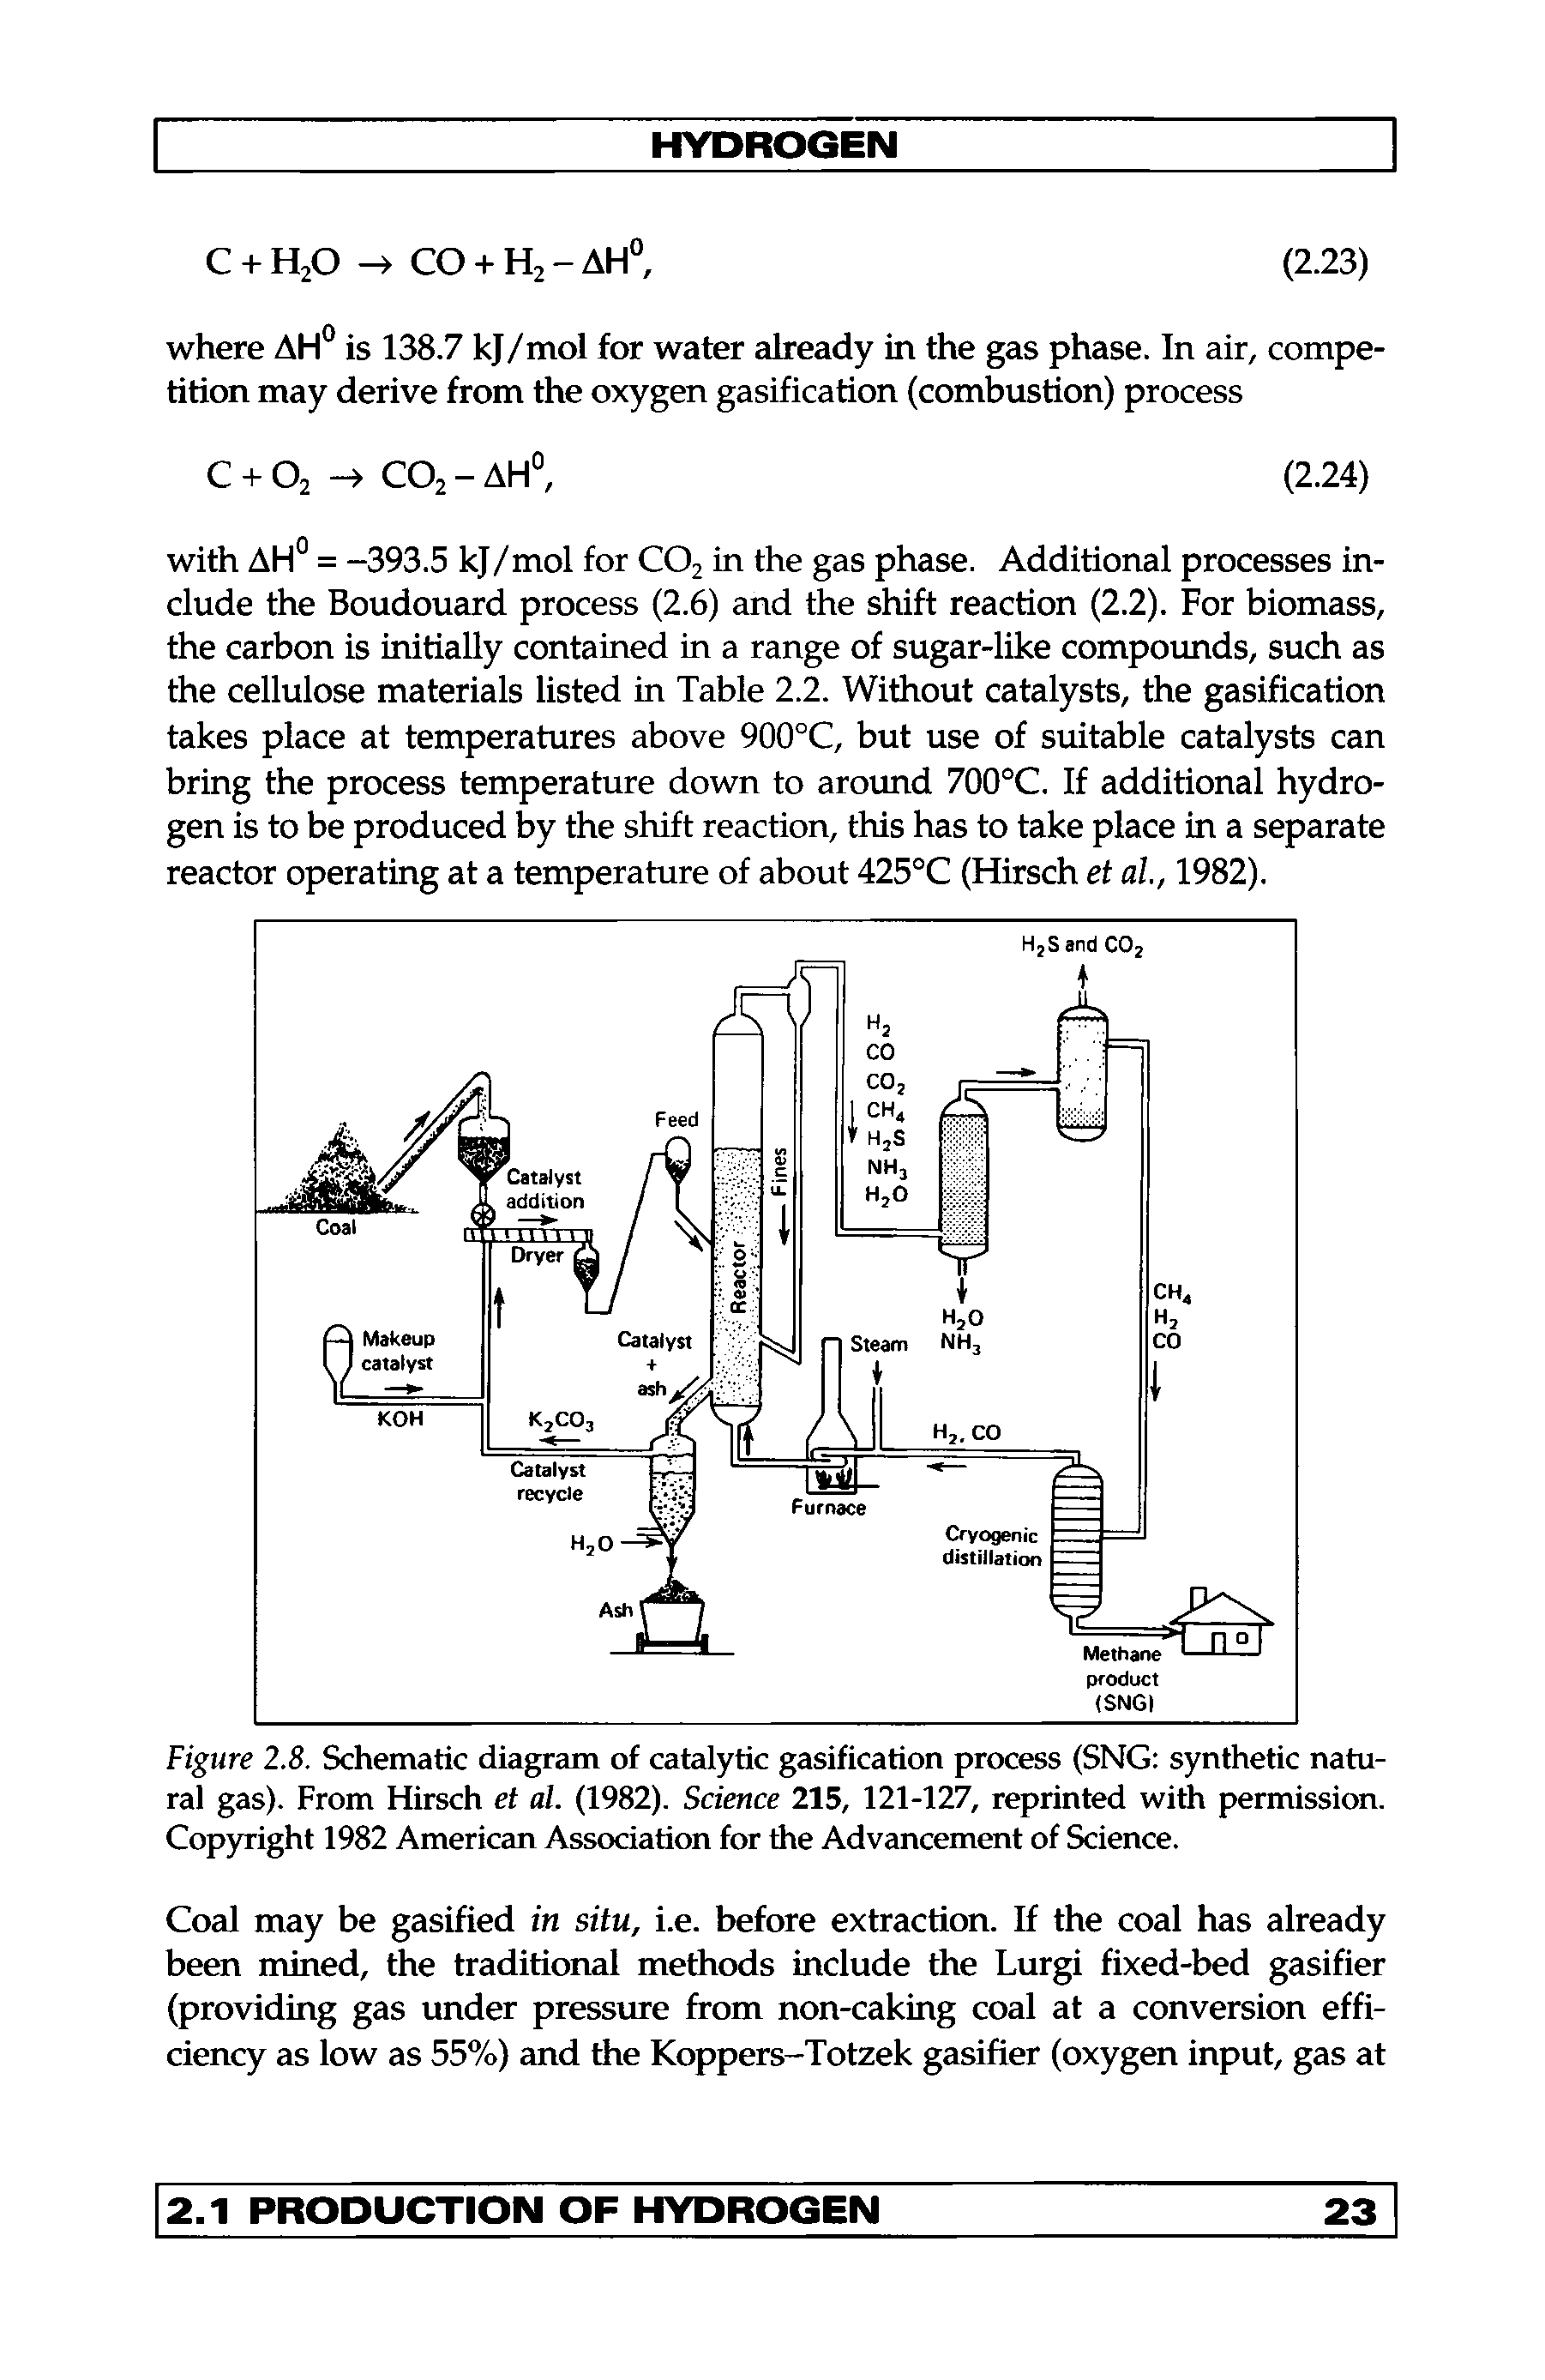 Figure 2.8. Schematic diagram of catalytic gasification process (SNG synthetic natural gas). From Hirsch et al. (1982). Science 215, 121-127, reprinted with permission. Copyright 1982 American Association for the Advancement of Science.